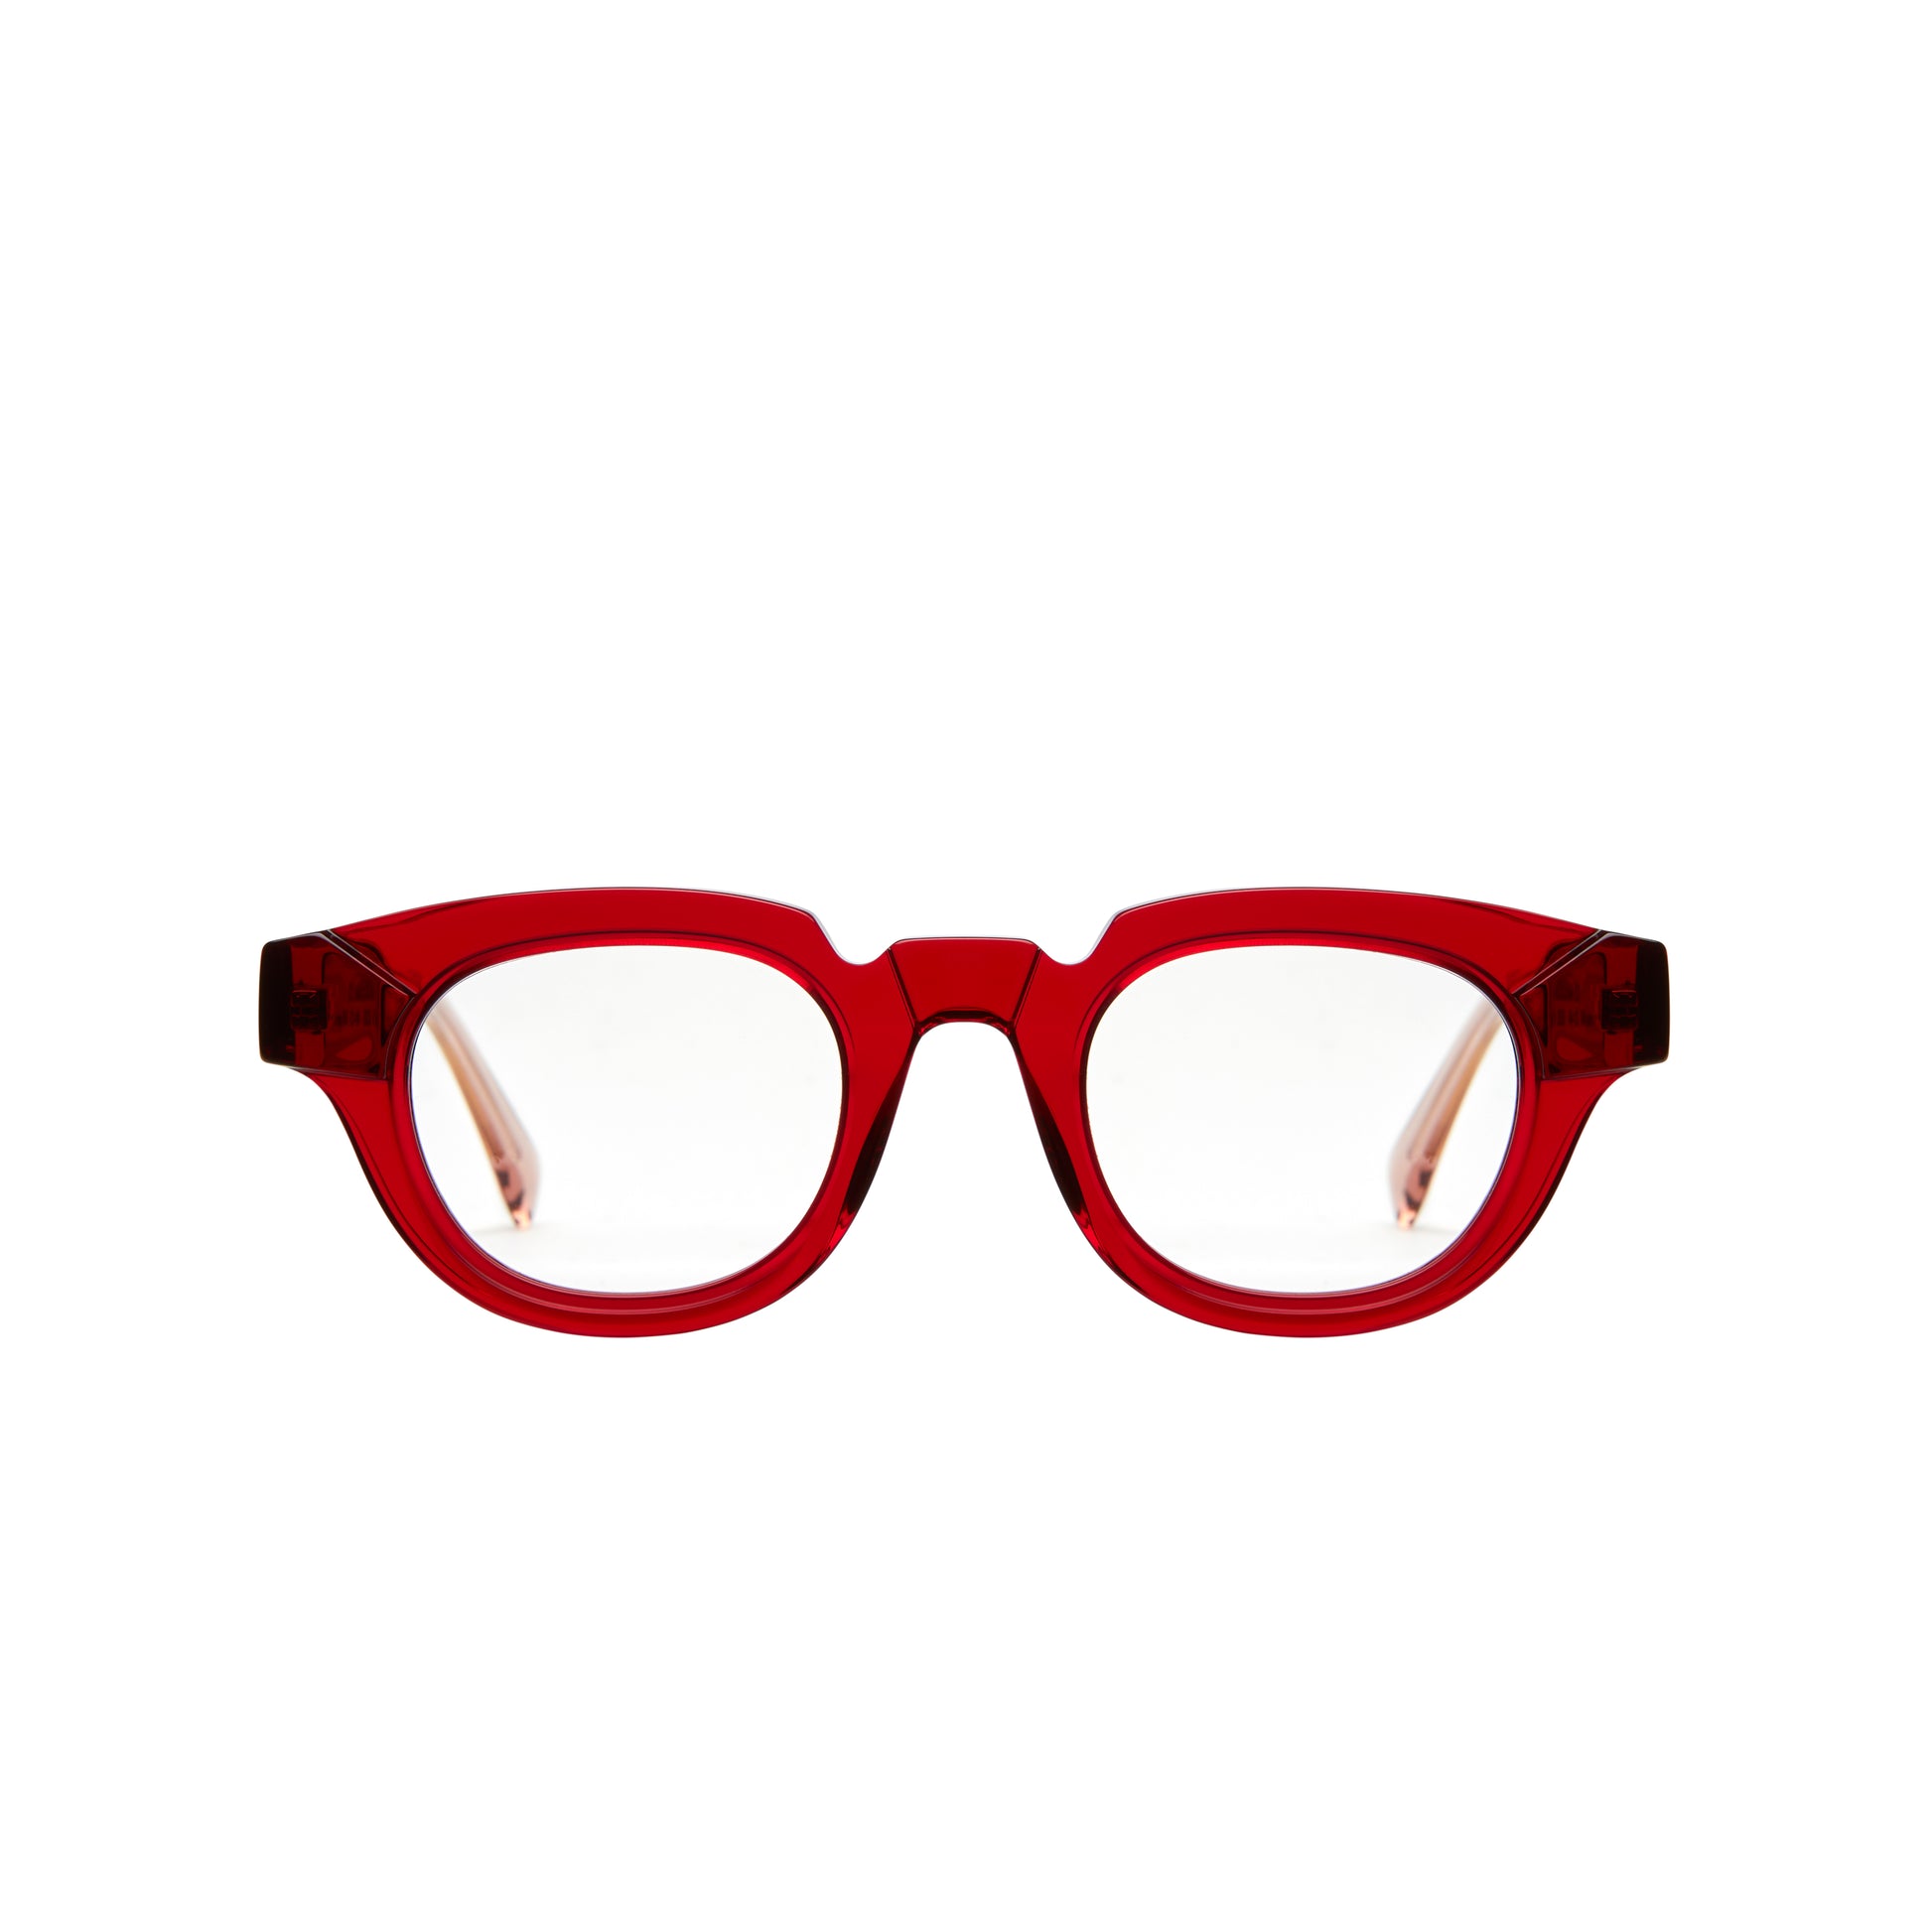 <p>Kuboraum  MASKE S1 is a  Red, Transparent pink; Acetate Optical  Frame with a Round shape.  </p><p>Shop with confidence from Adair Eyewear, a Kuboraum Authorized Dealer.  We have provided the best in customer service and great designer eyewear for over 40 years. Visit https://adaireyewearonline.com</p>